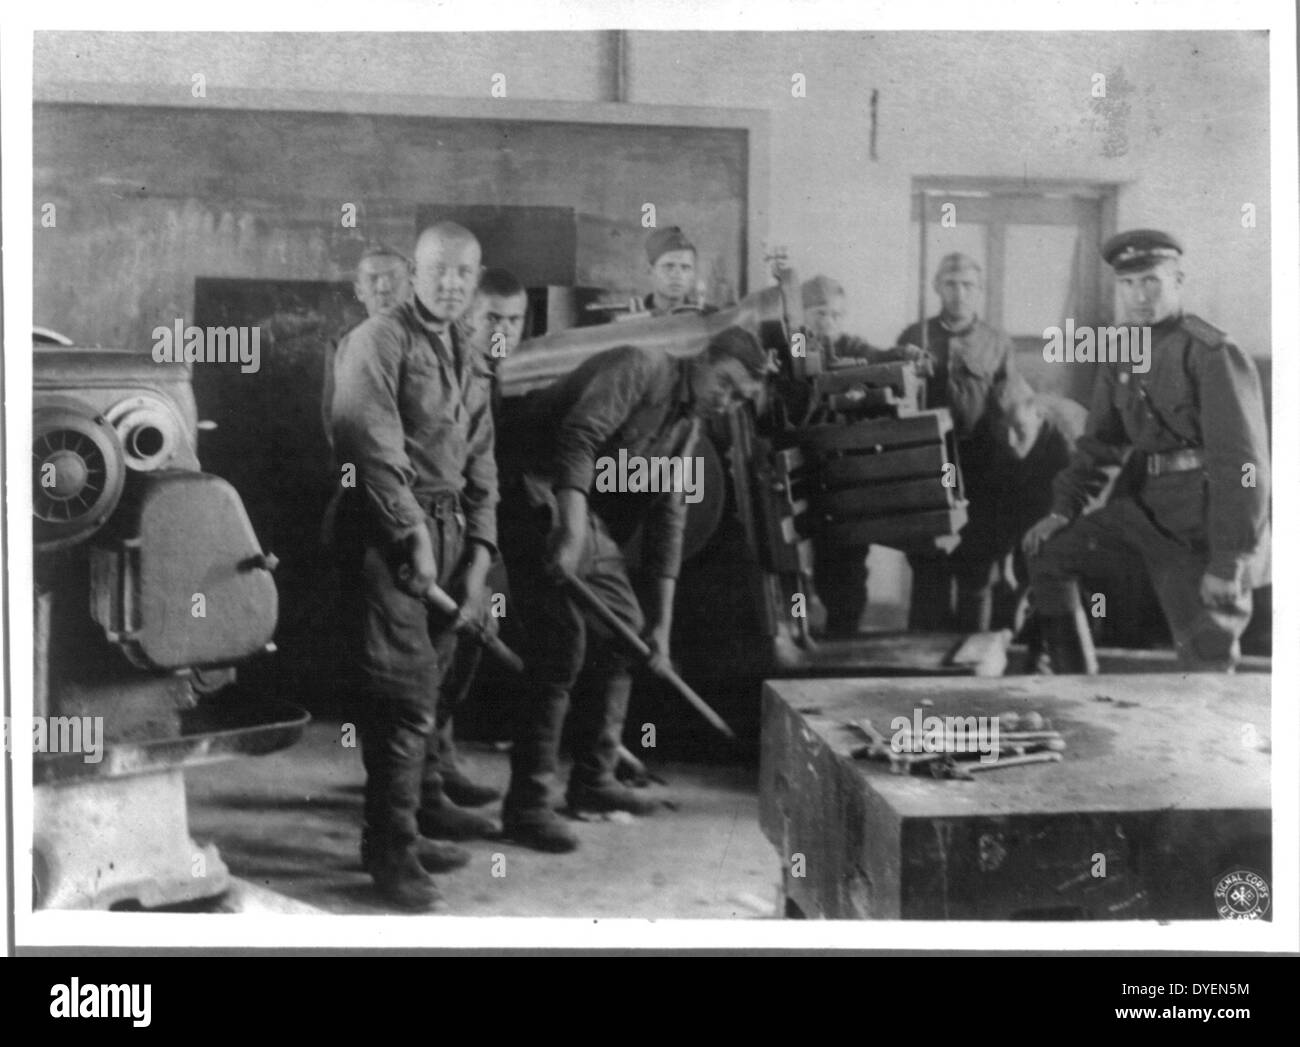 Soviet soldiers in process of removing industrial equipment from Manchurian factories at the end of World War II 1945. Stock Photo